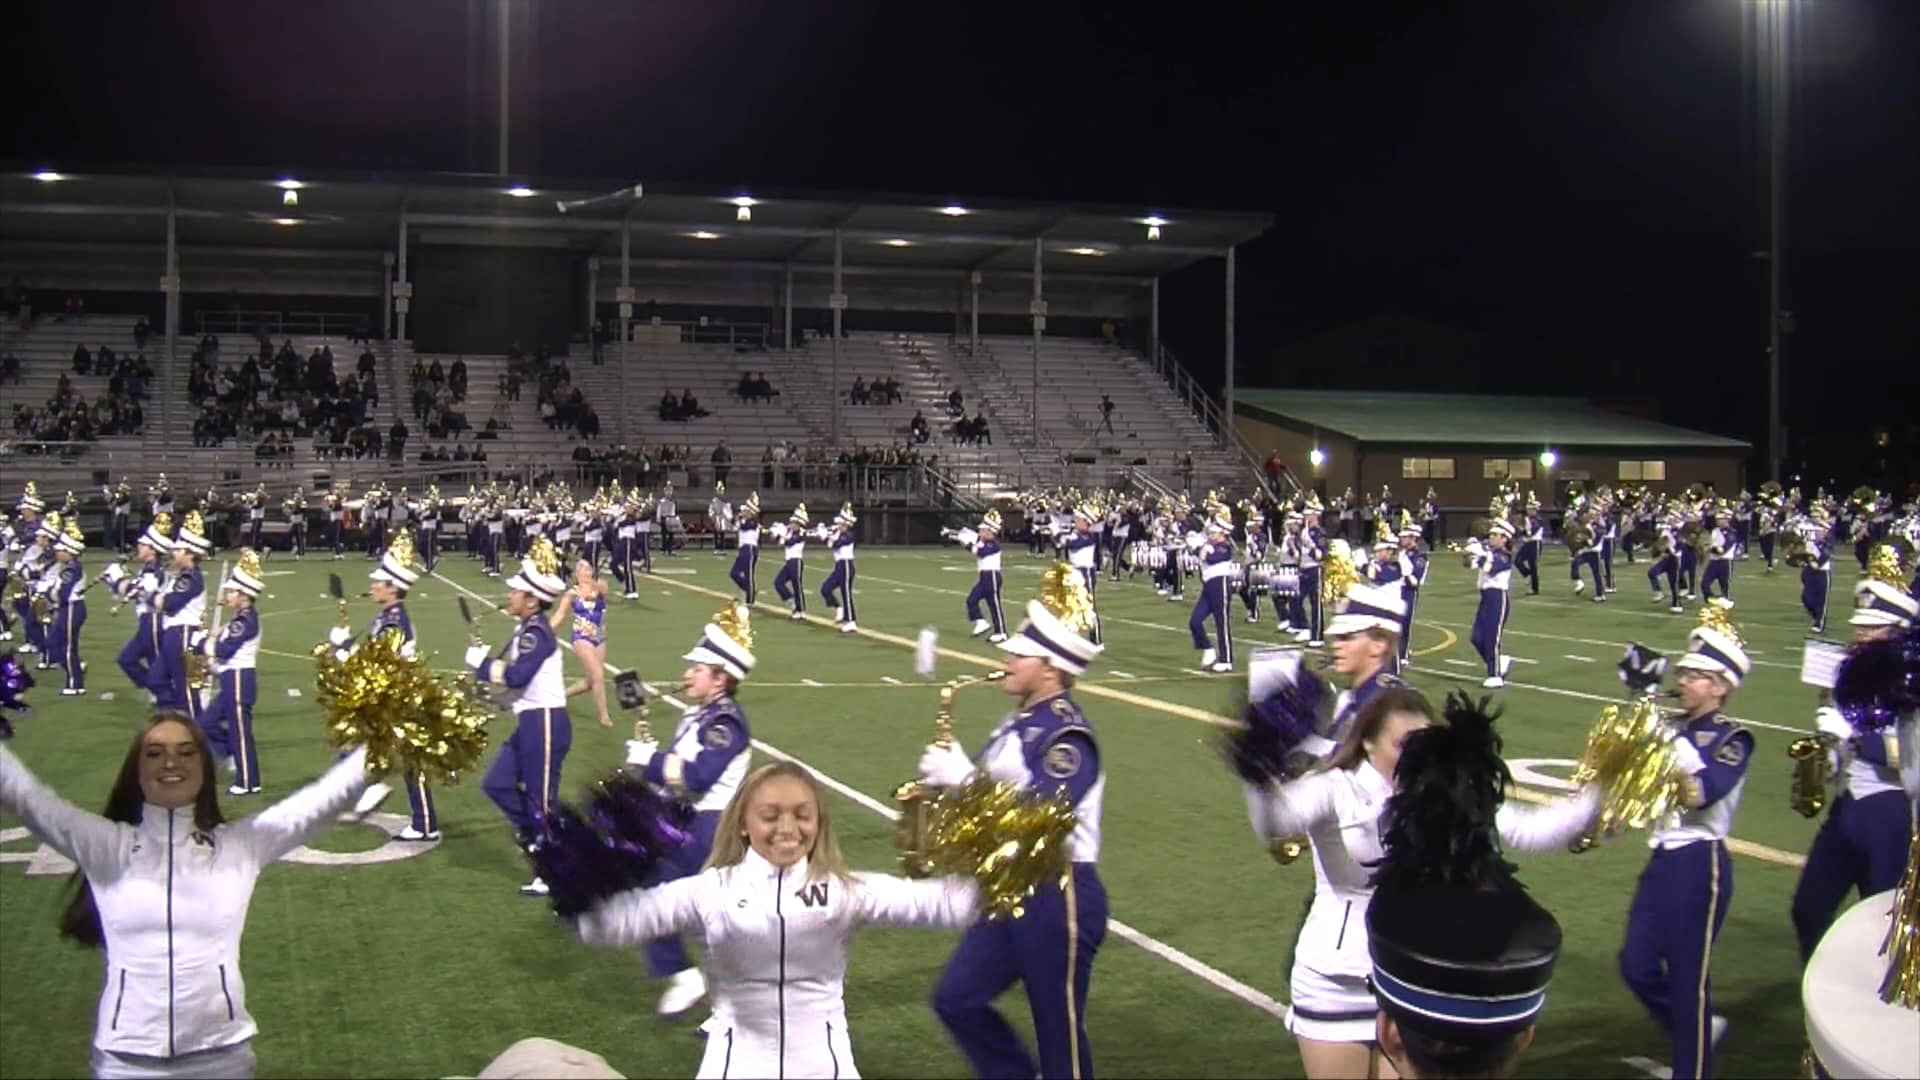 Two Great Bands at Pop Keeney Stadium on Vimeo